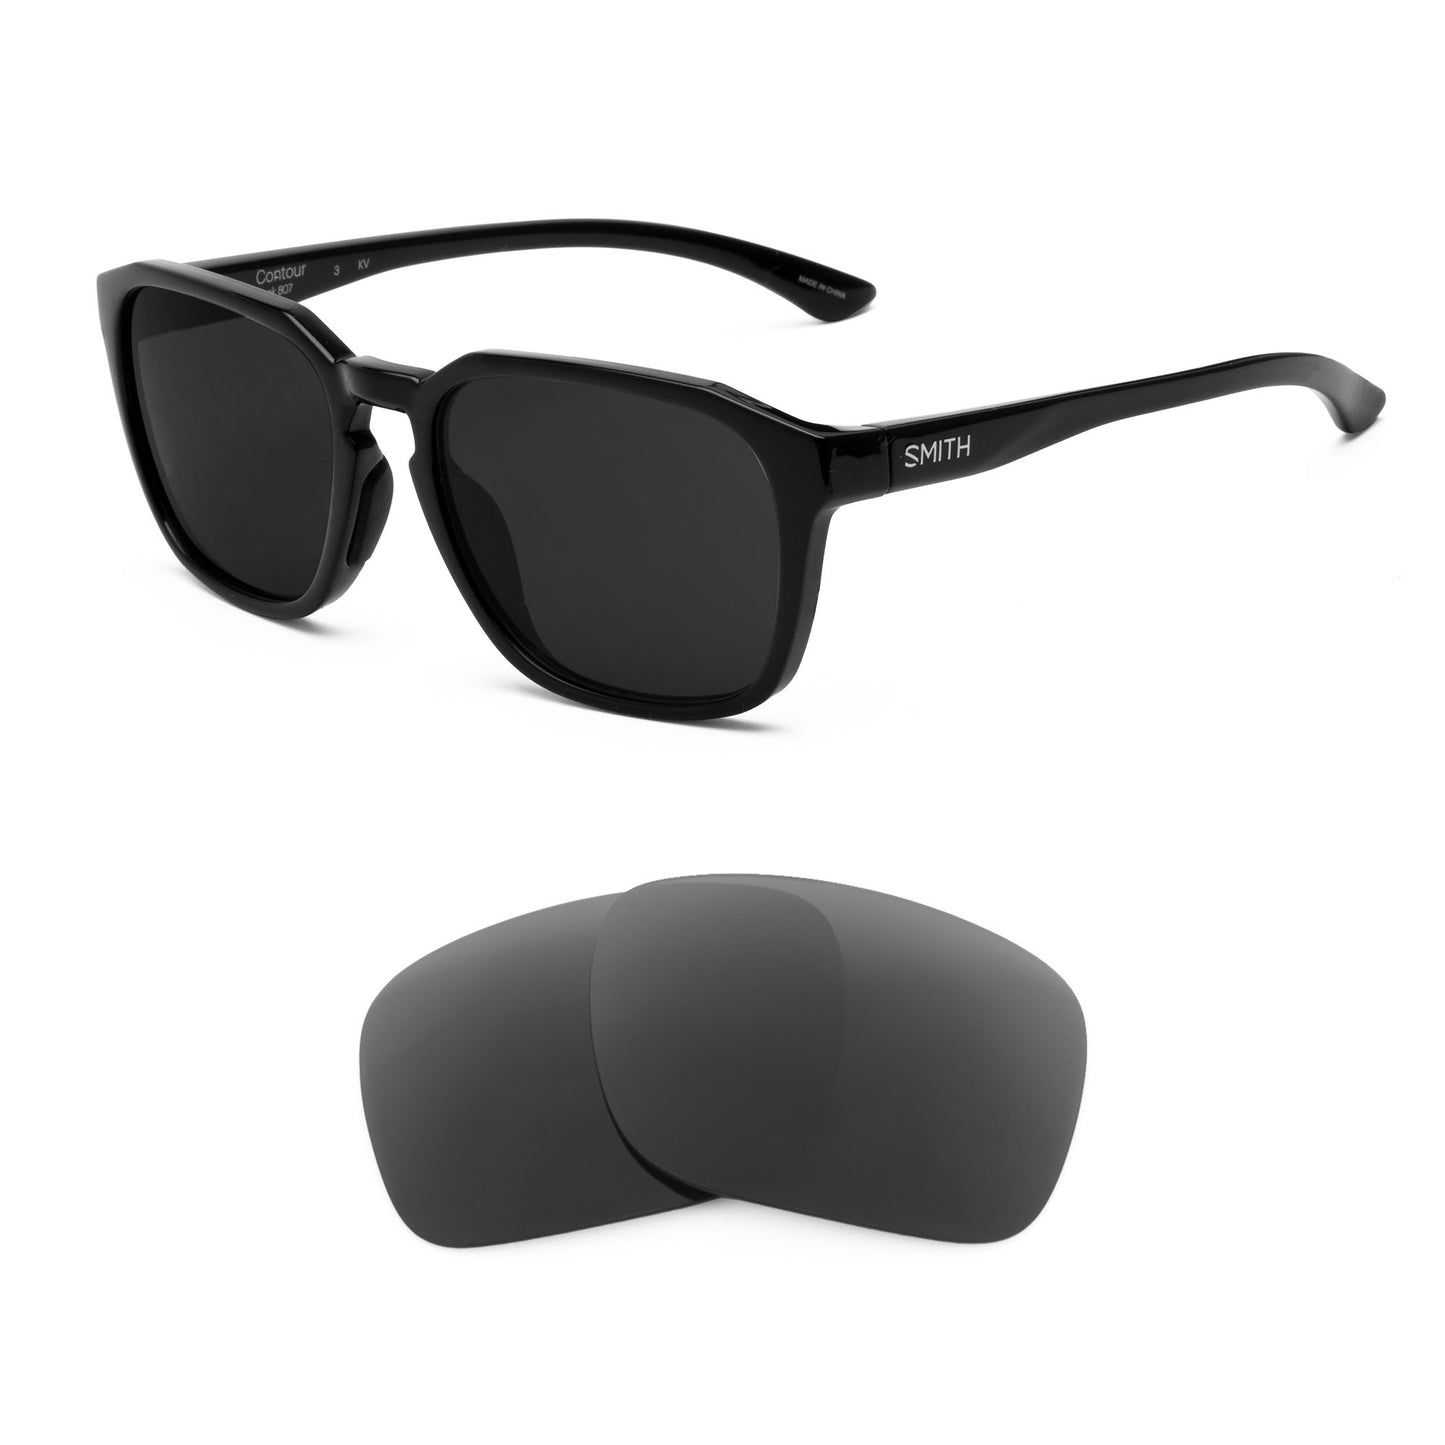 Smith Contour sunglasses with replacement lenses